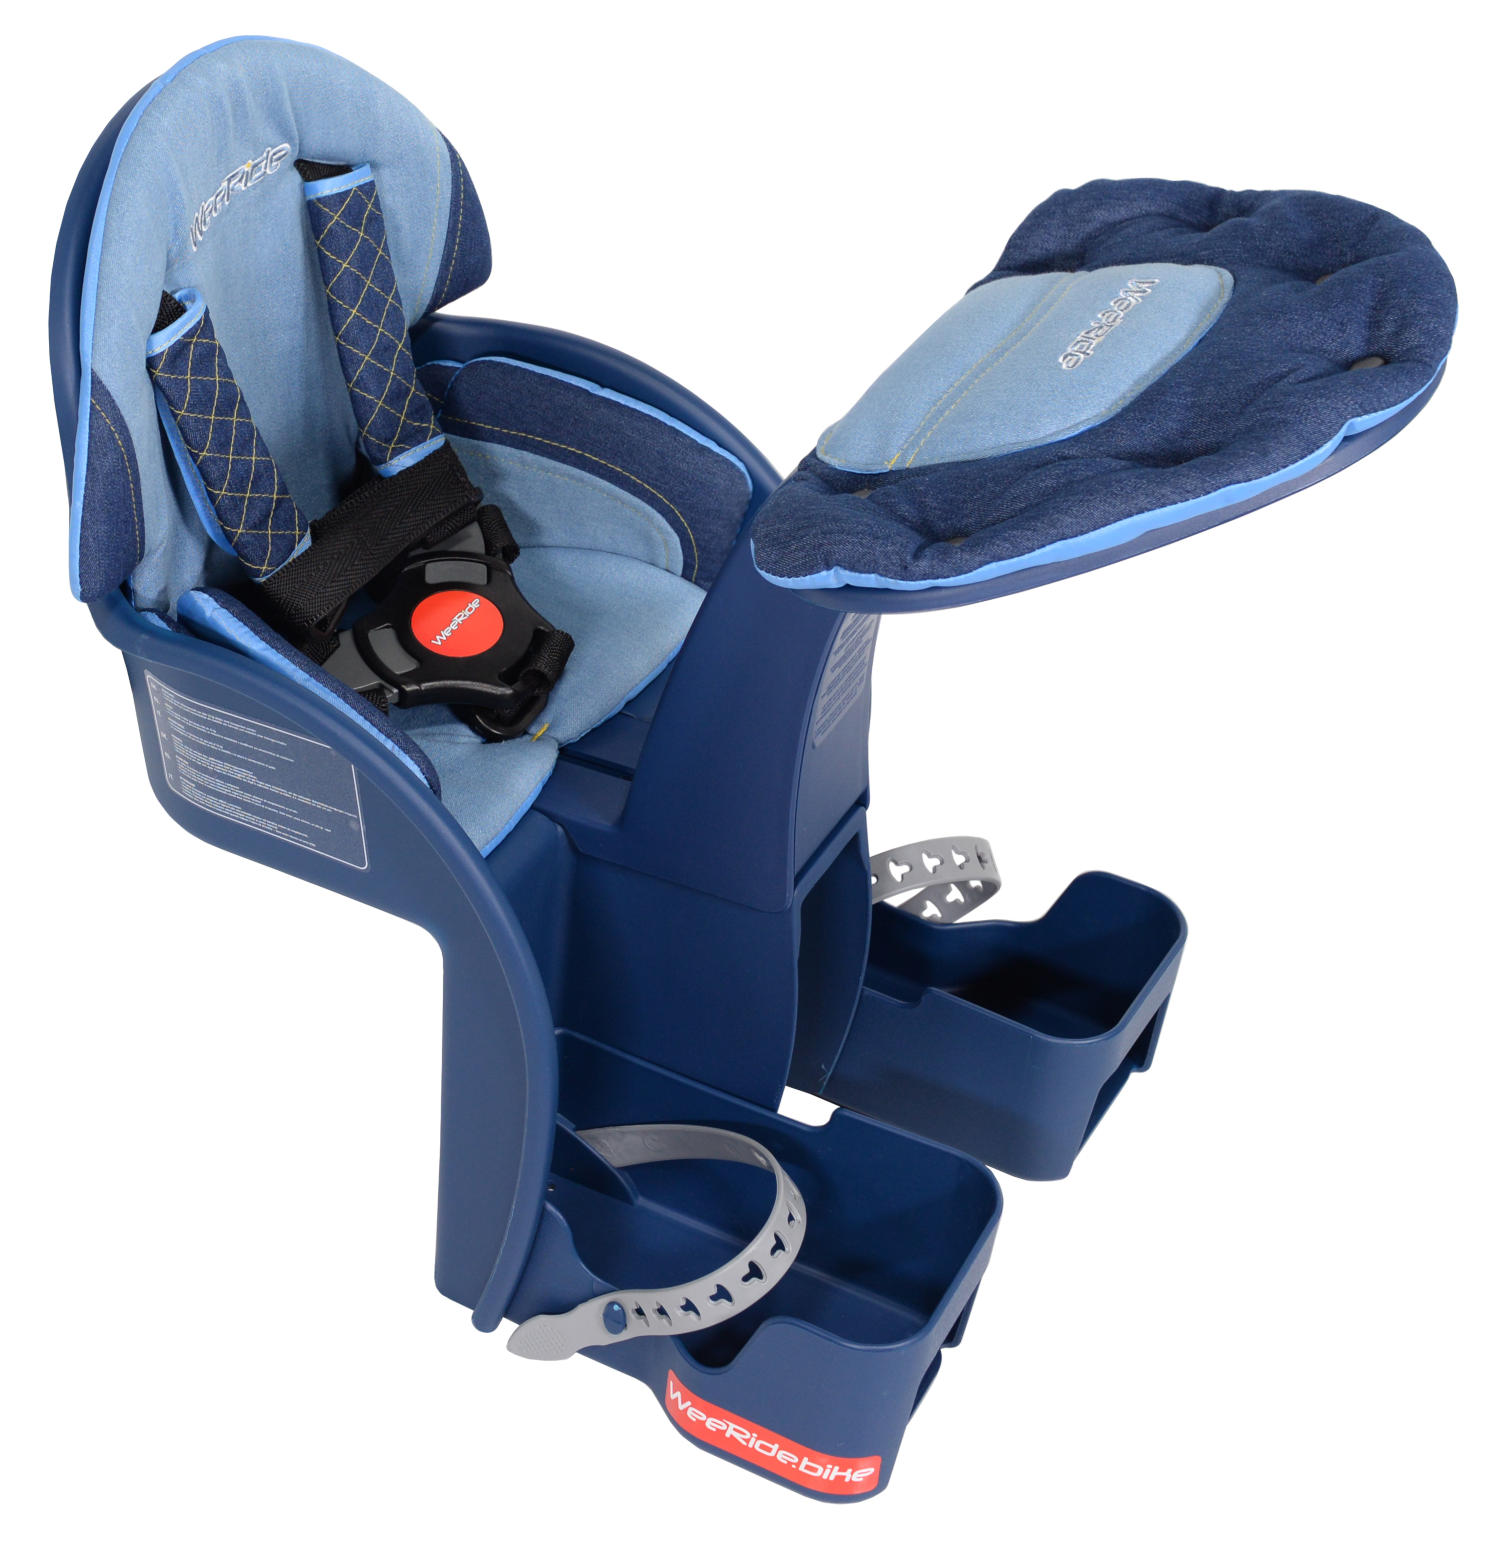 WeeRide Kangaroo DELUXE Bike Safety Front Mounted Child Seat Ages 1-4